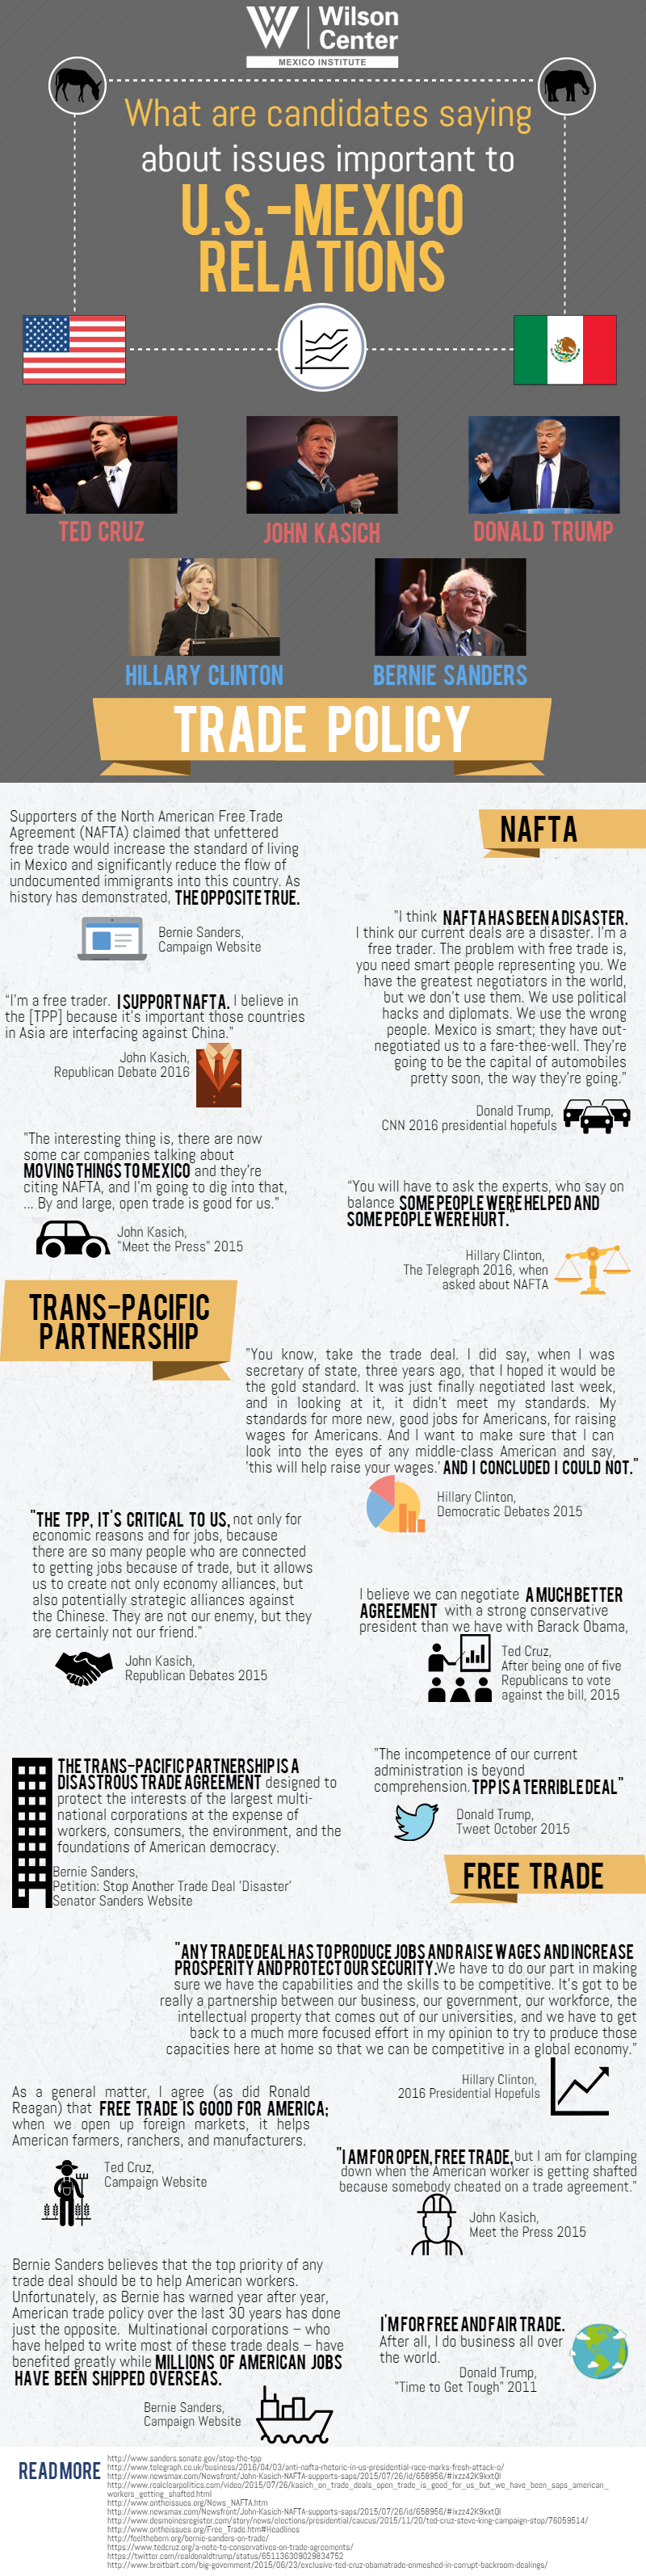 Infographic | What are Candidates Saying about Issues Important to U.S.-Mexico Relations: Trade Policy